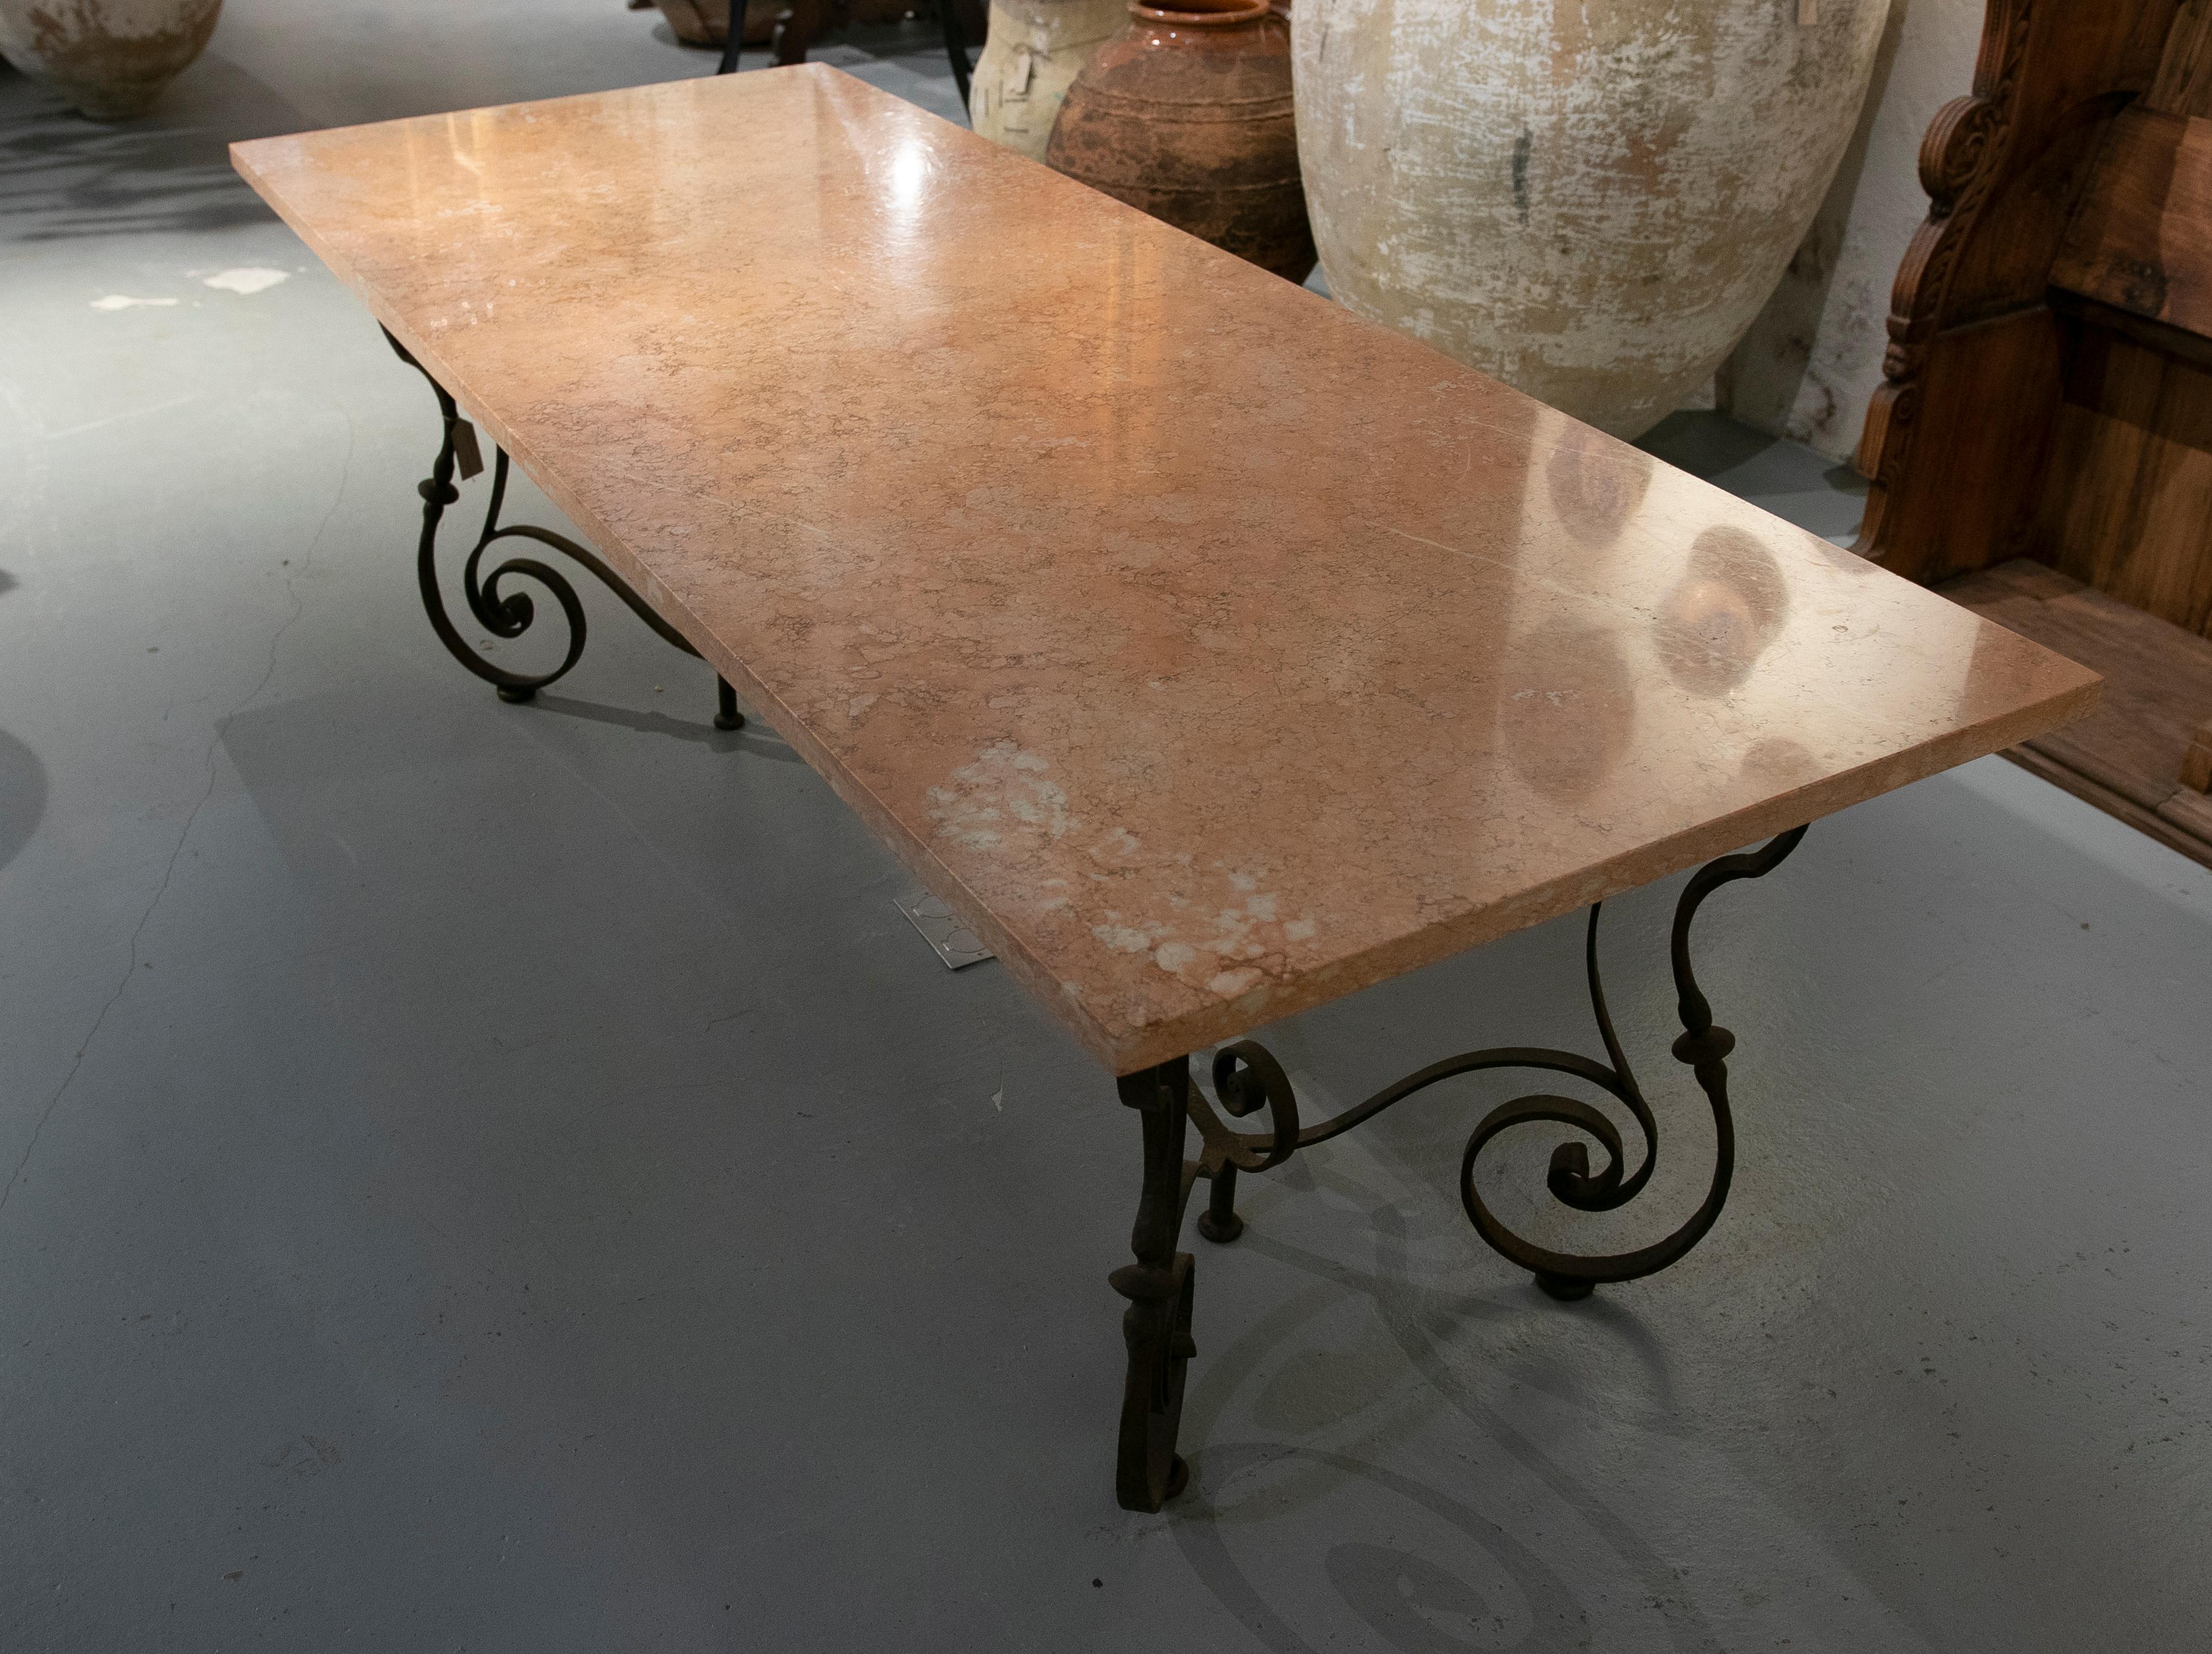 Italian Table with Iron Base and Rosseta Marble Top from Verona 14